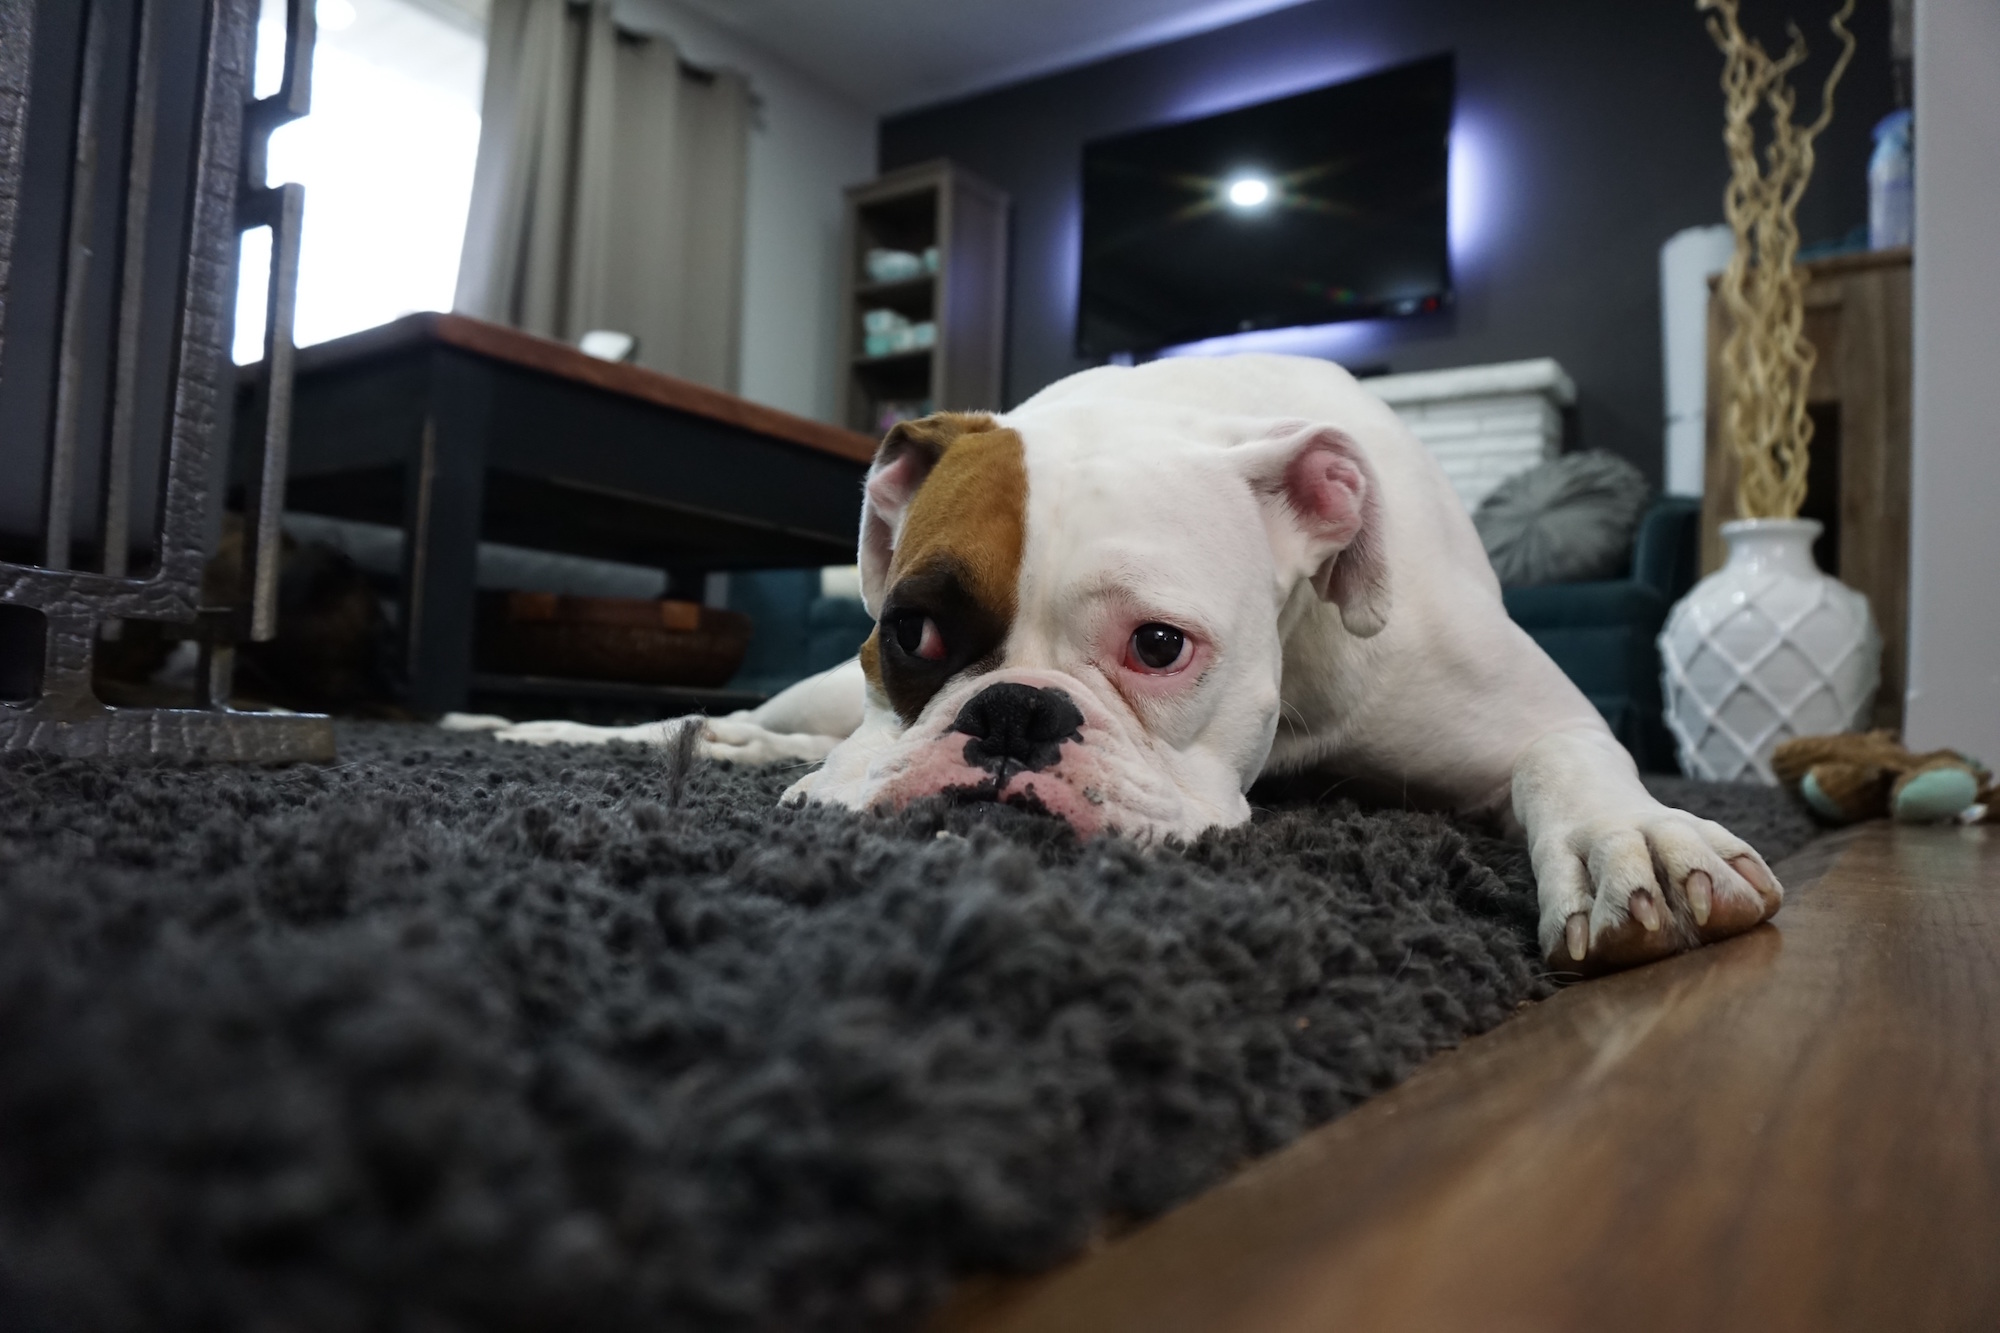 Pet stains on carpets, carpet cleaning in New Jersey.